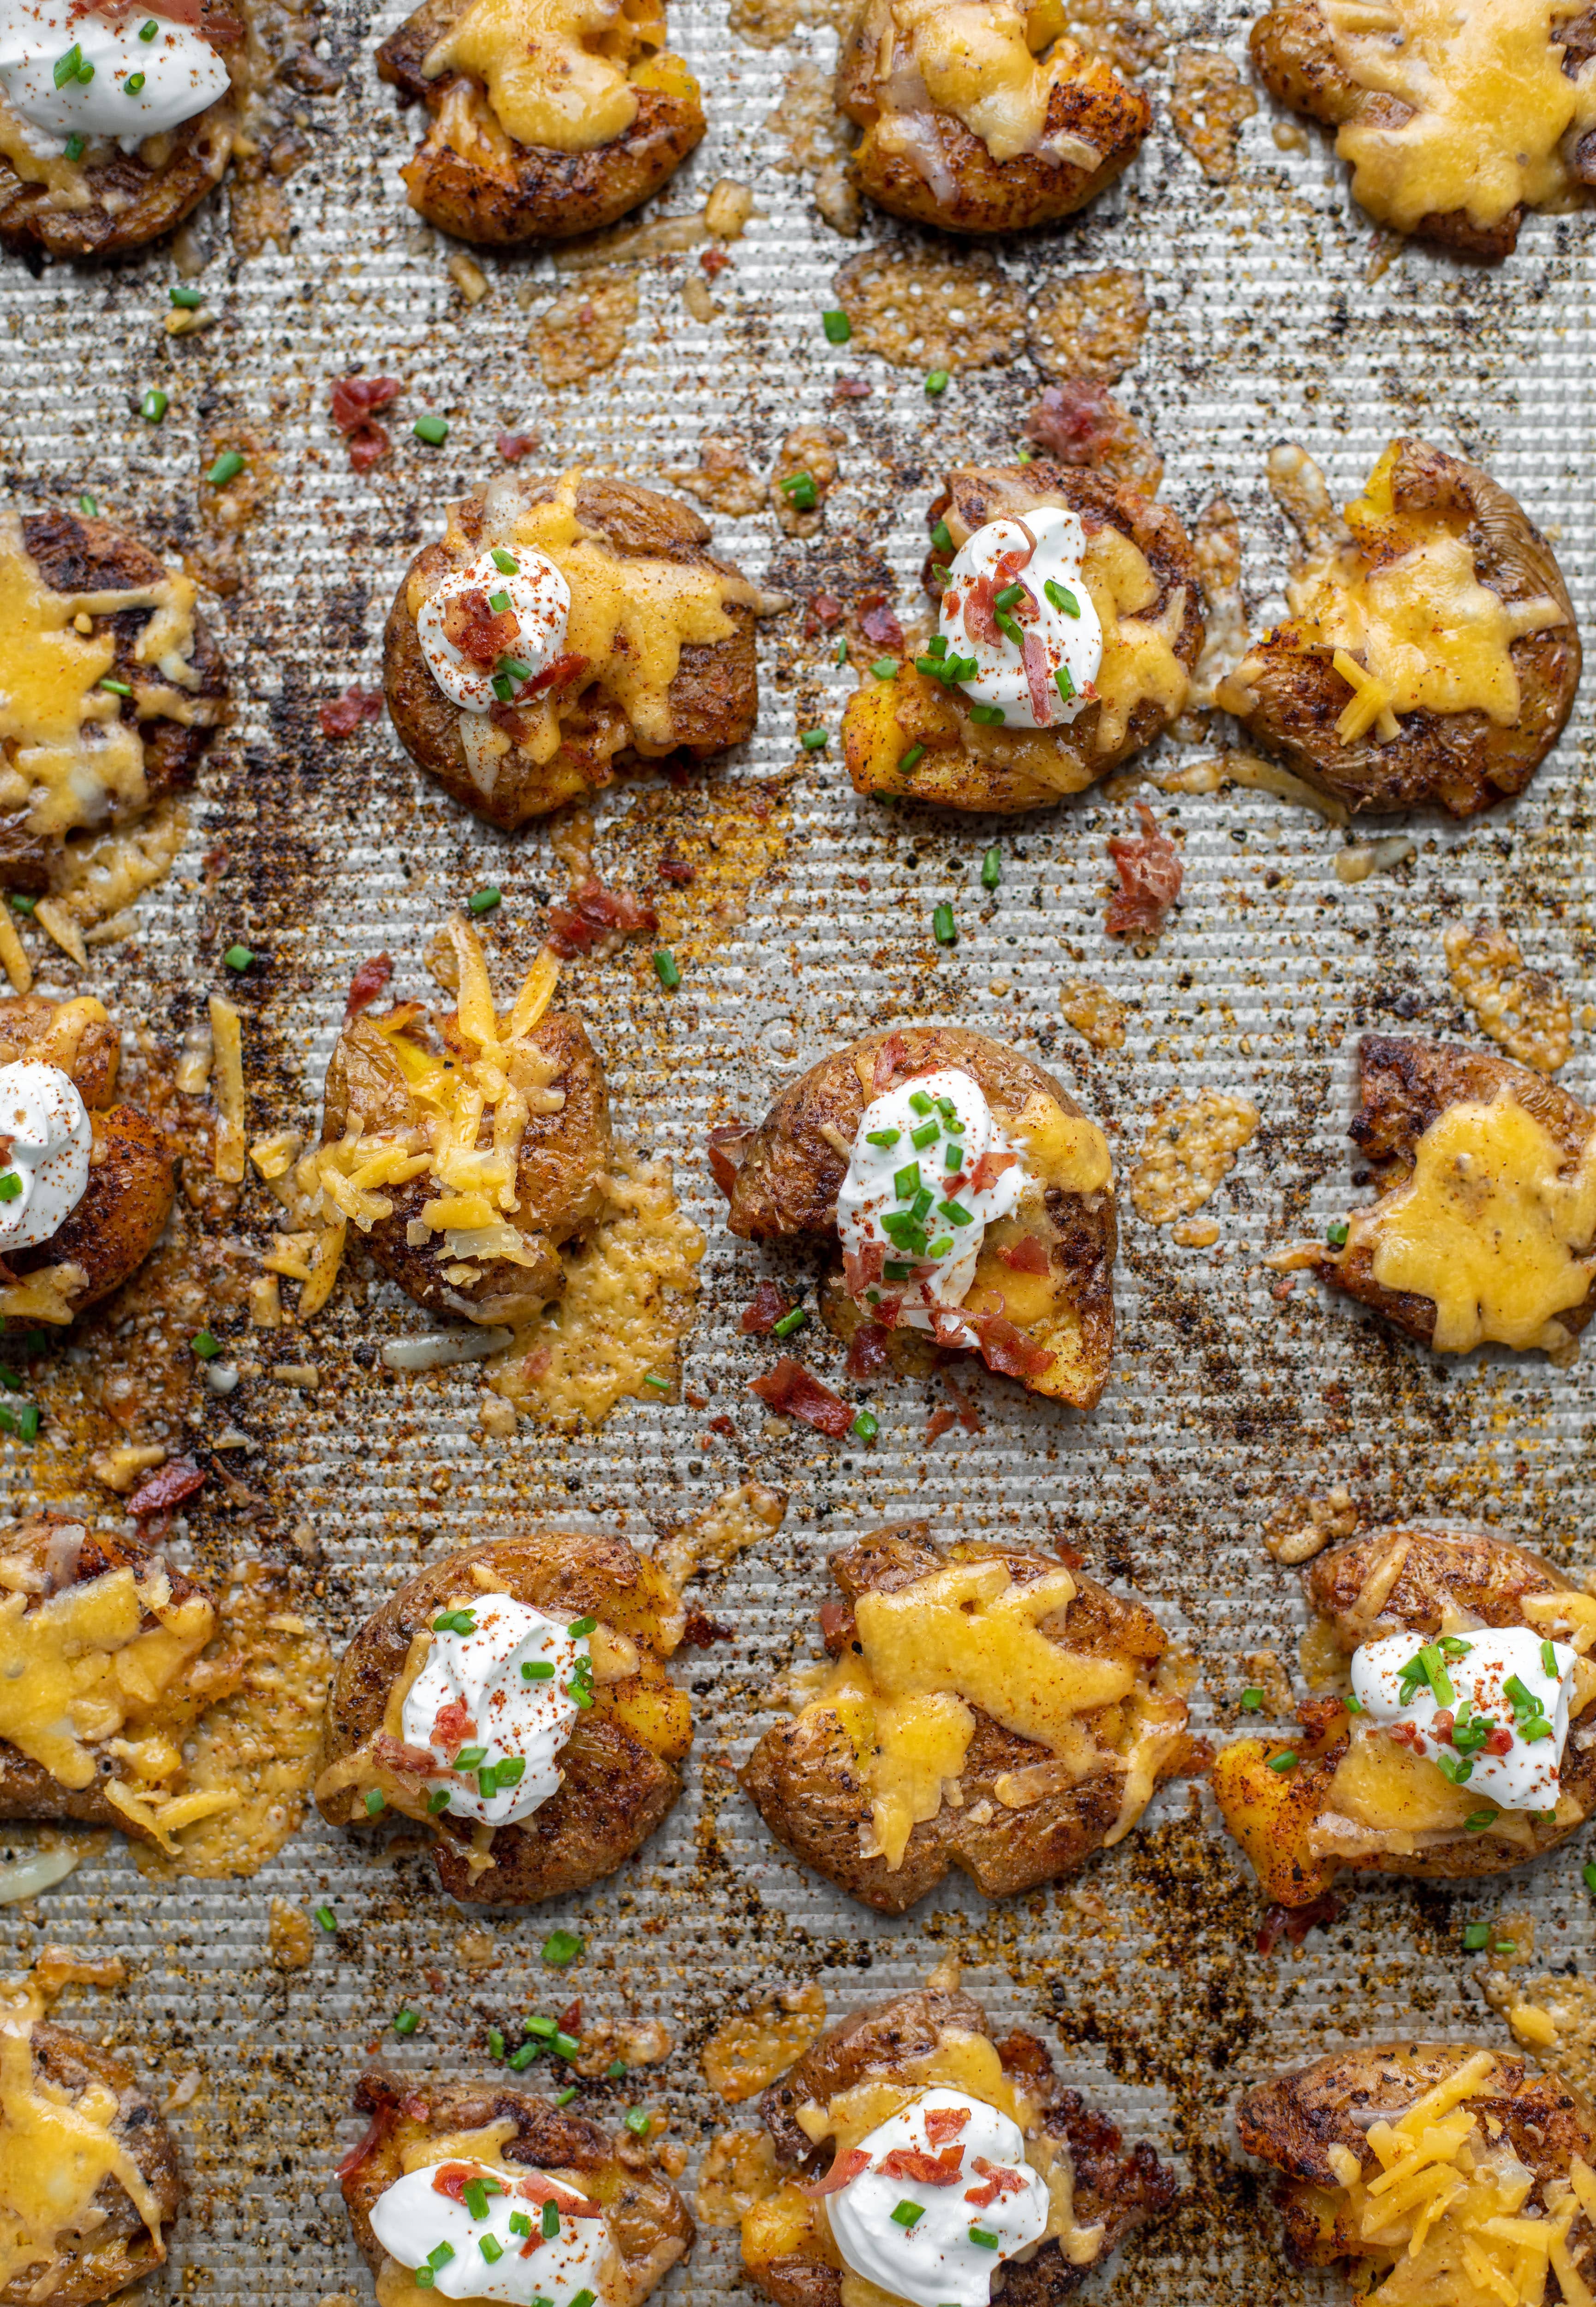 Chipotle cheddar smashed potatoes on a baking sheet. These super crispy chipotle cheddar smashed potatoes are the best side dish. A little spicy and smothered in cheese, they are irresistible. 